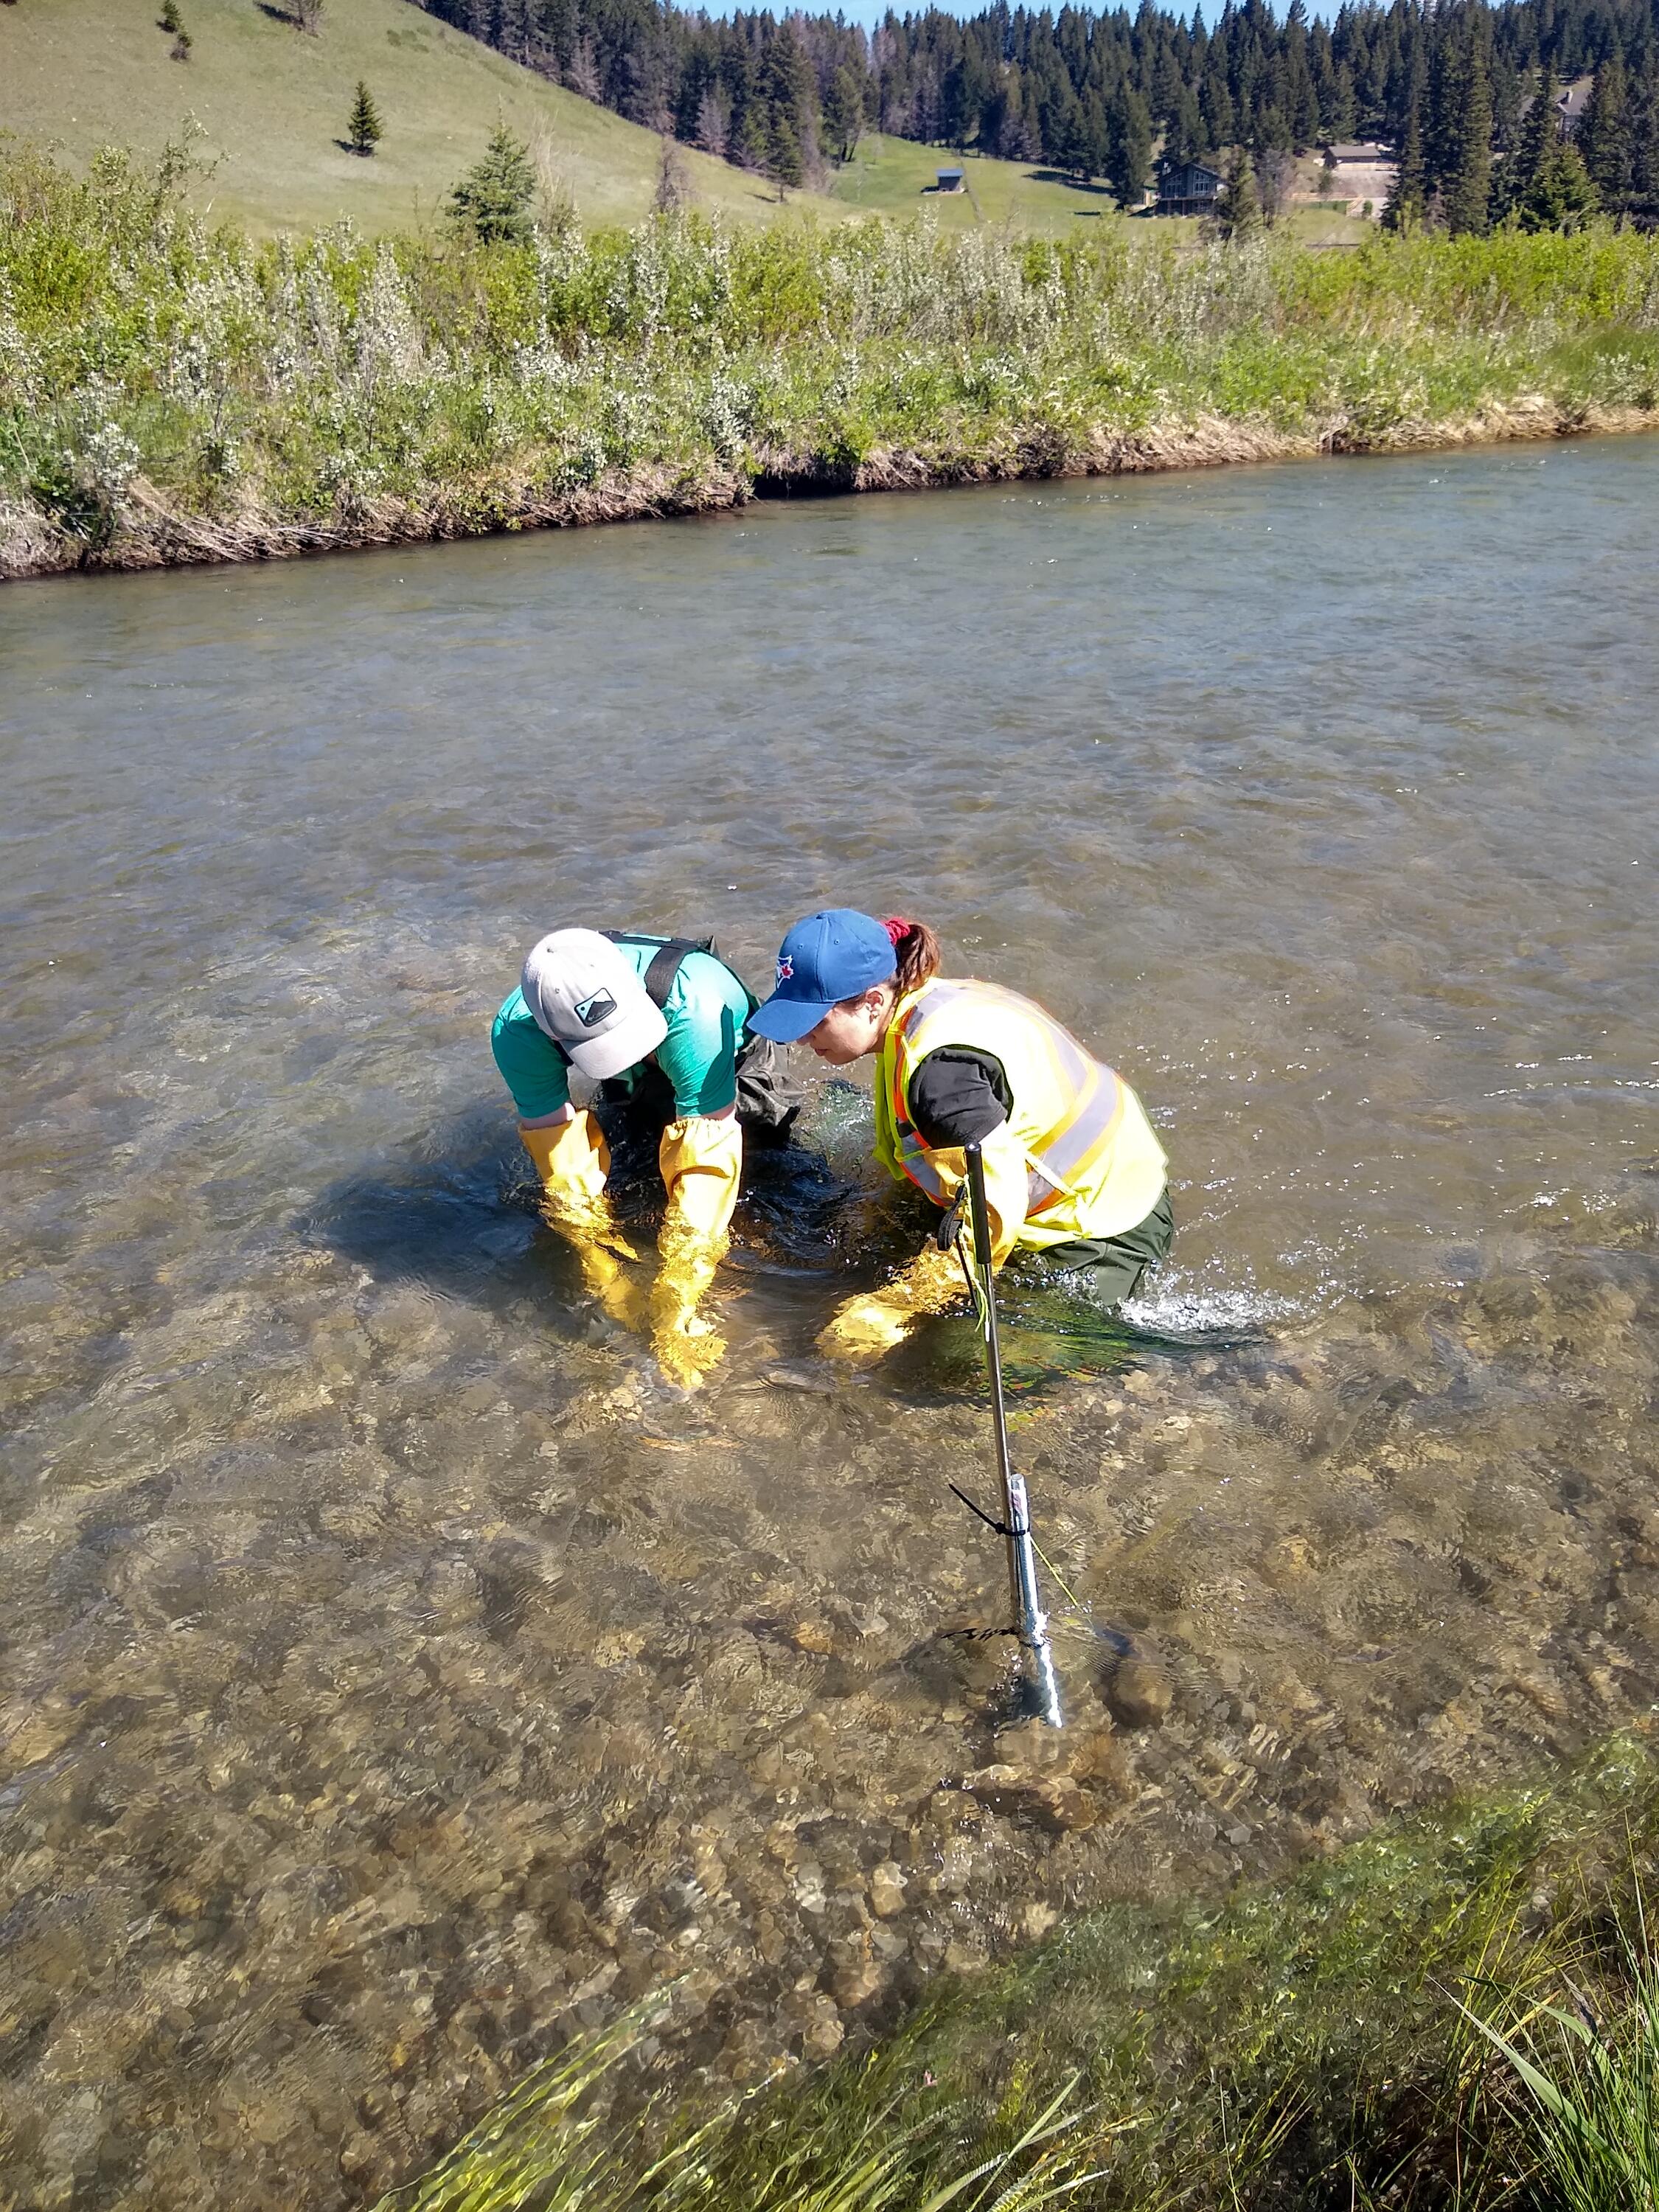 Collecting river samples